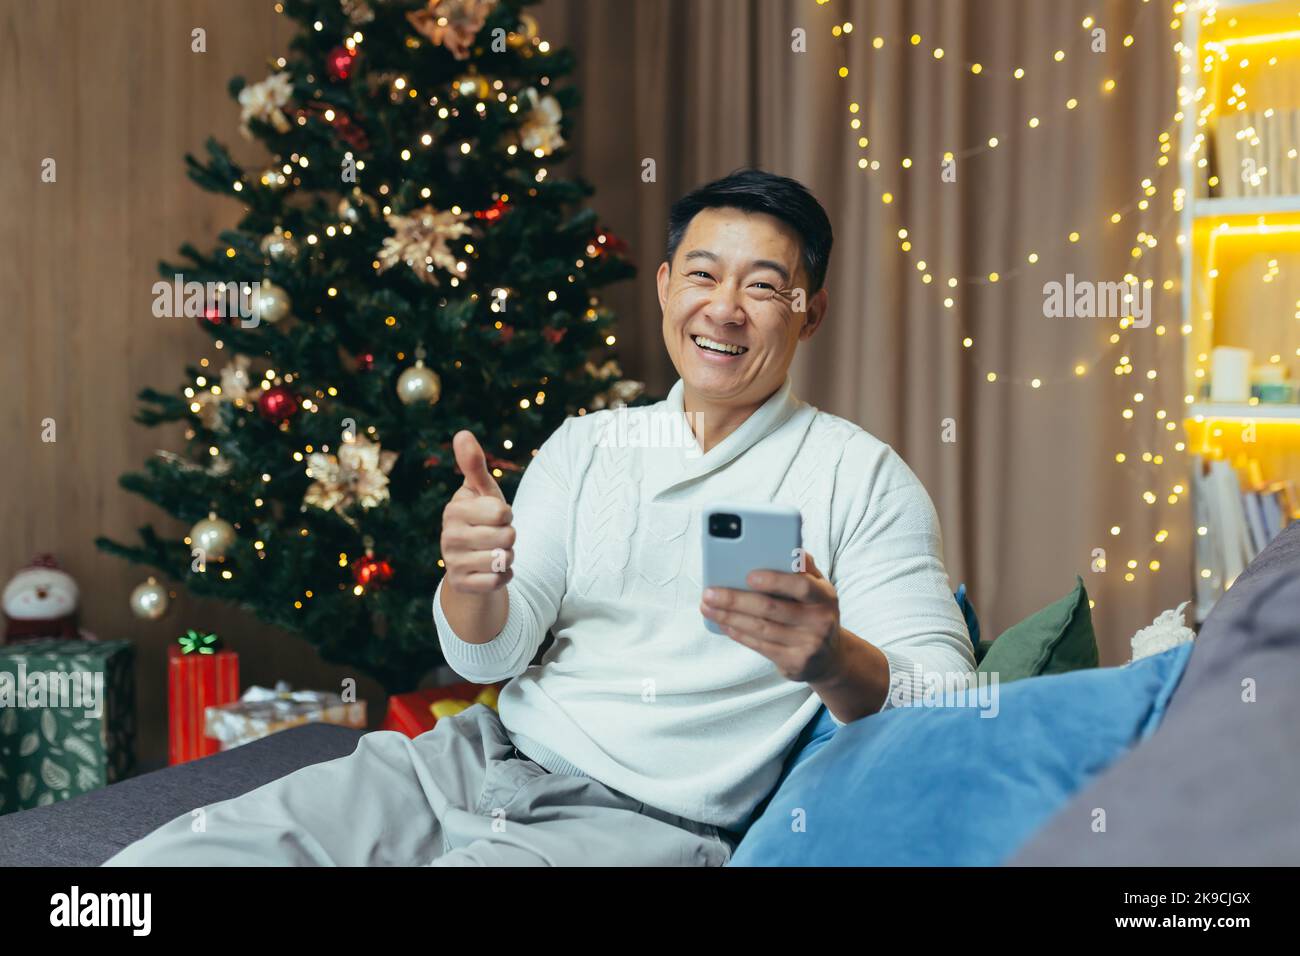 Asian man on christmas at home looking at camera and smiling, man celebrating new year and holidays, sitting on sofa in living room holding phone. Stock Photo